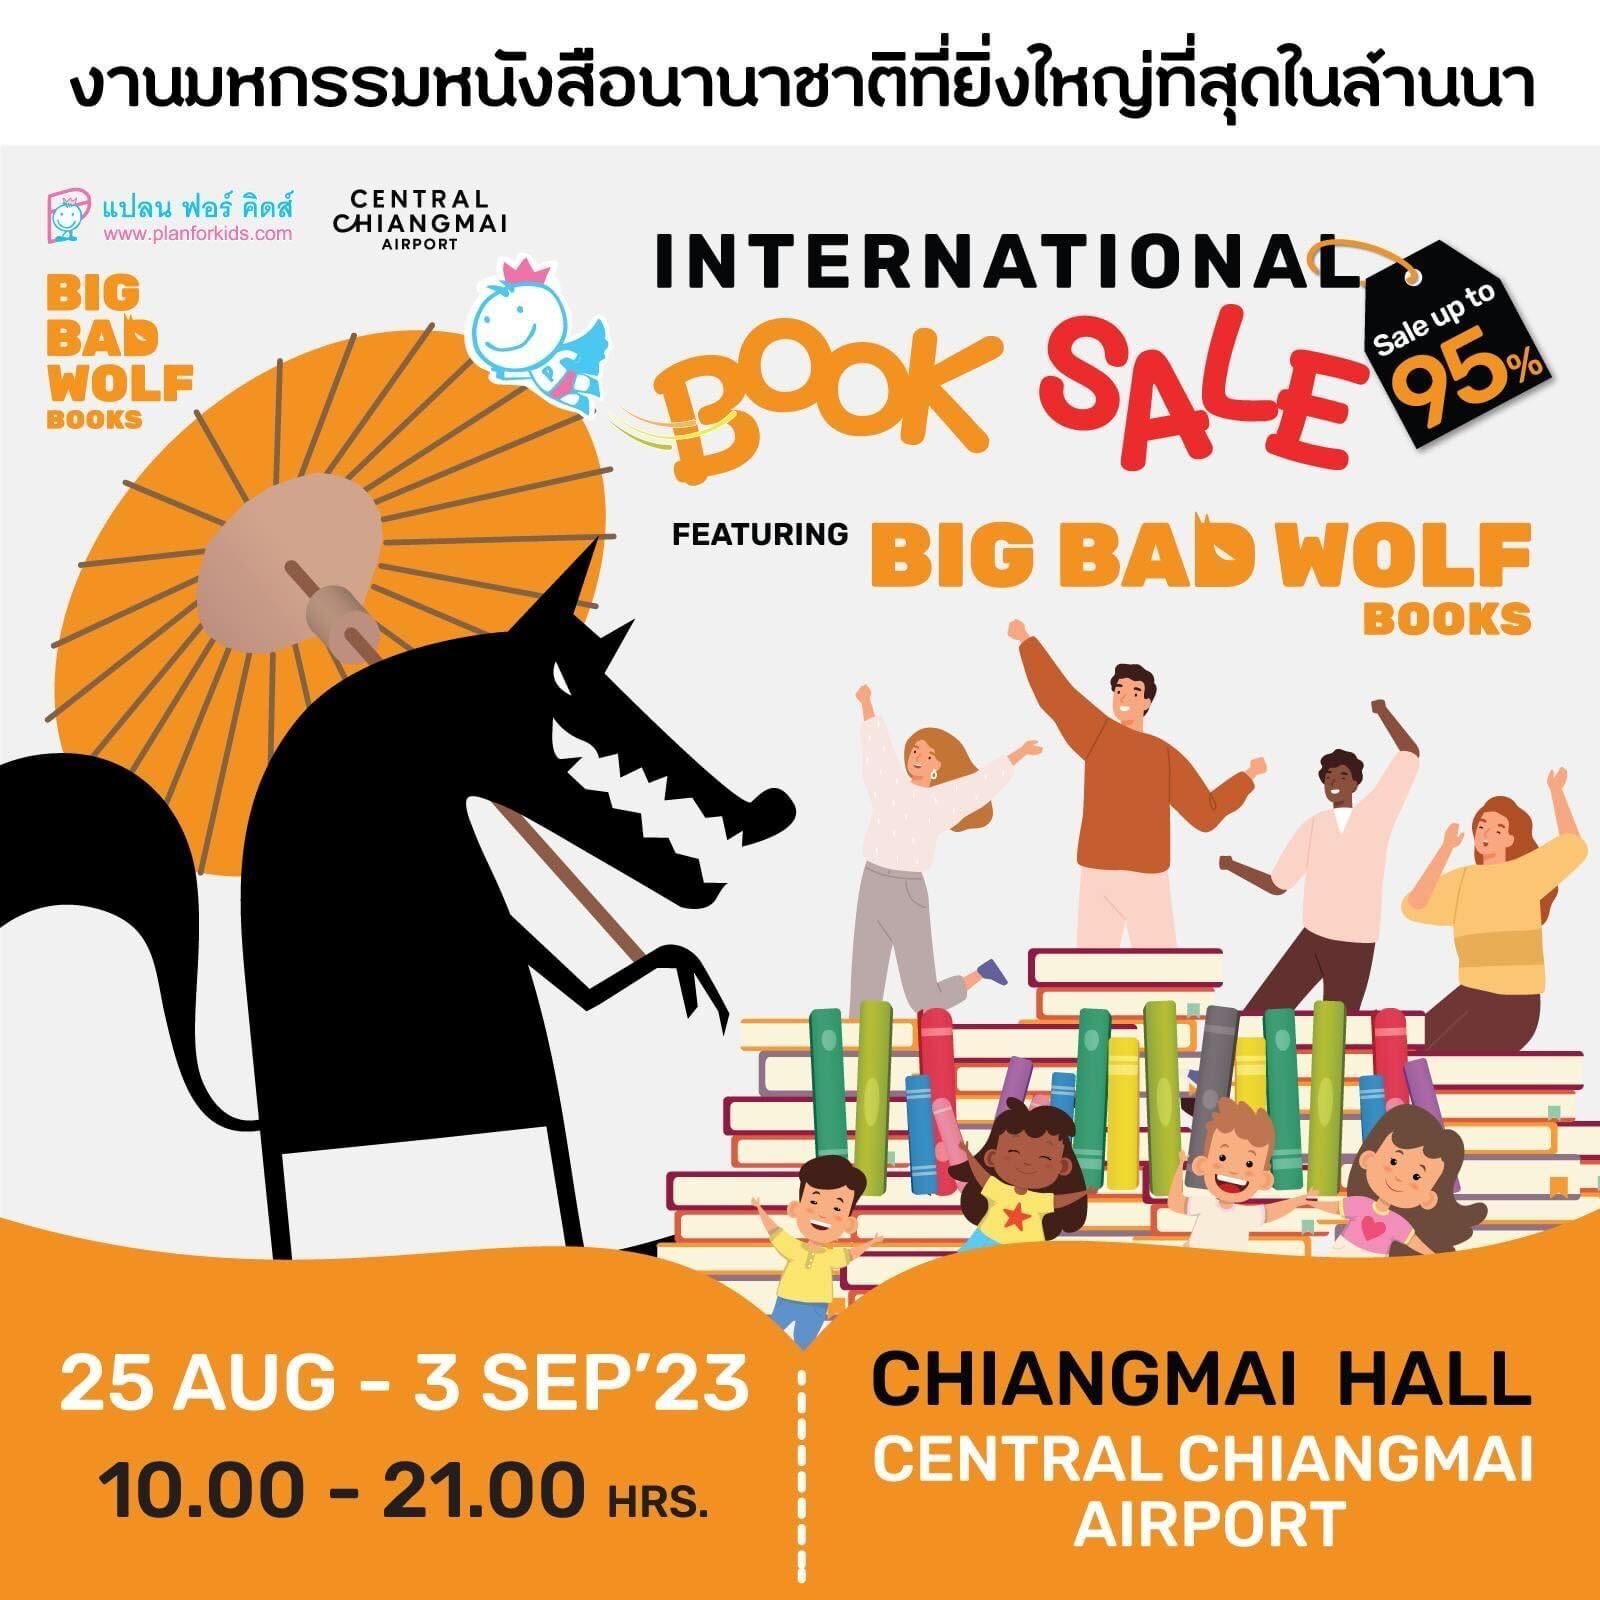 Central Chiangmai Airport - Big Bad Wolf